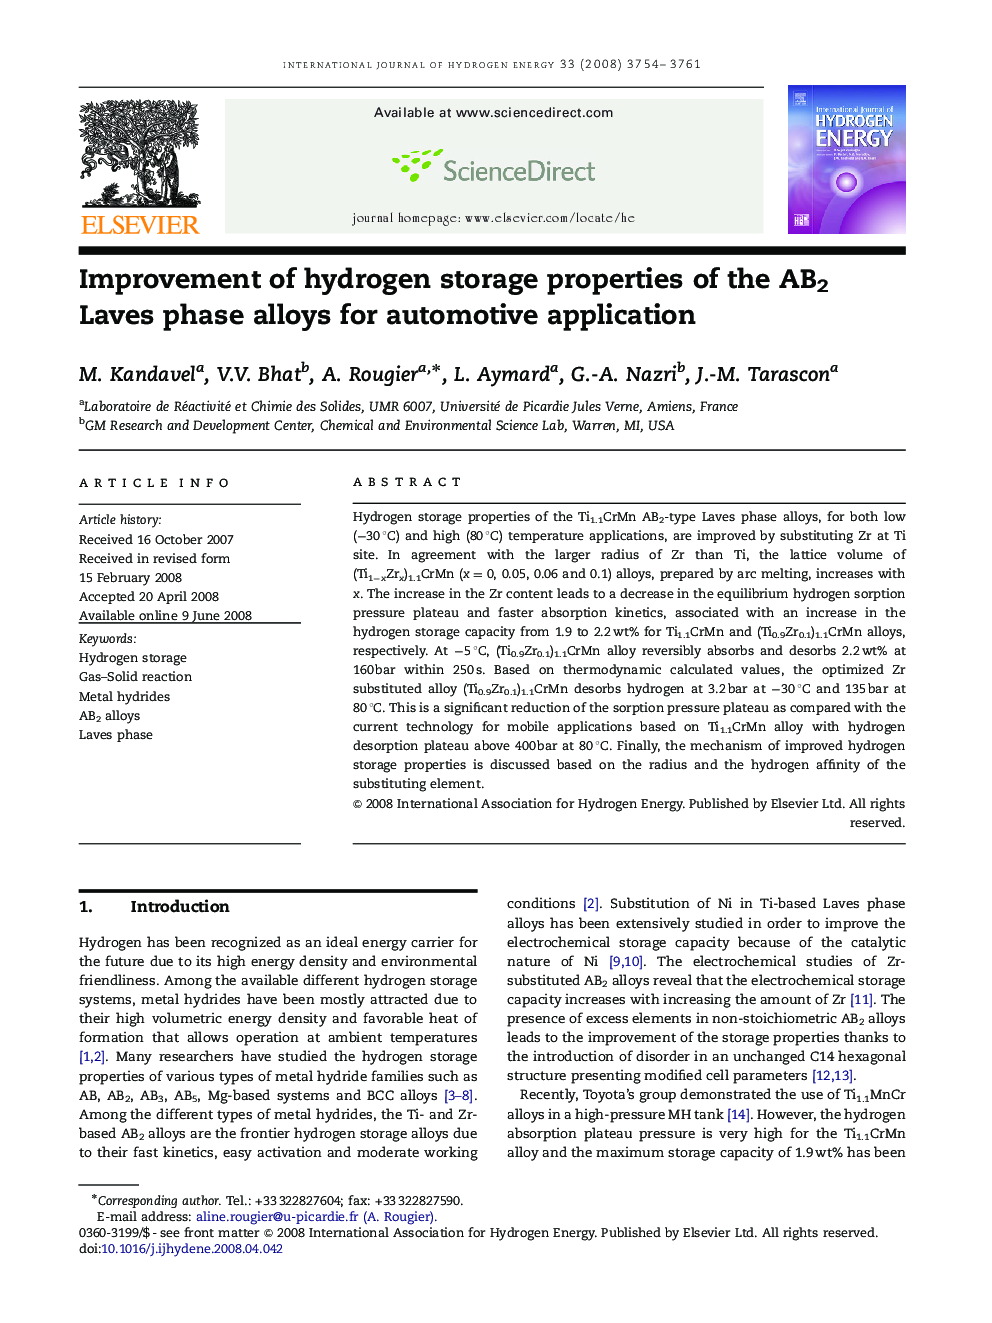 Improvement of hydrogen storage properties of the AB2 Laves phase alloys for automotive application